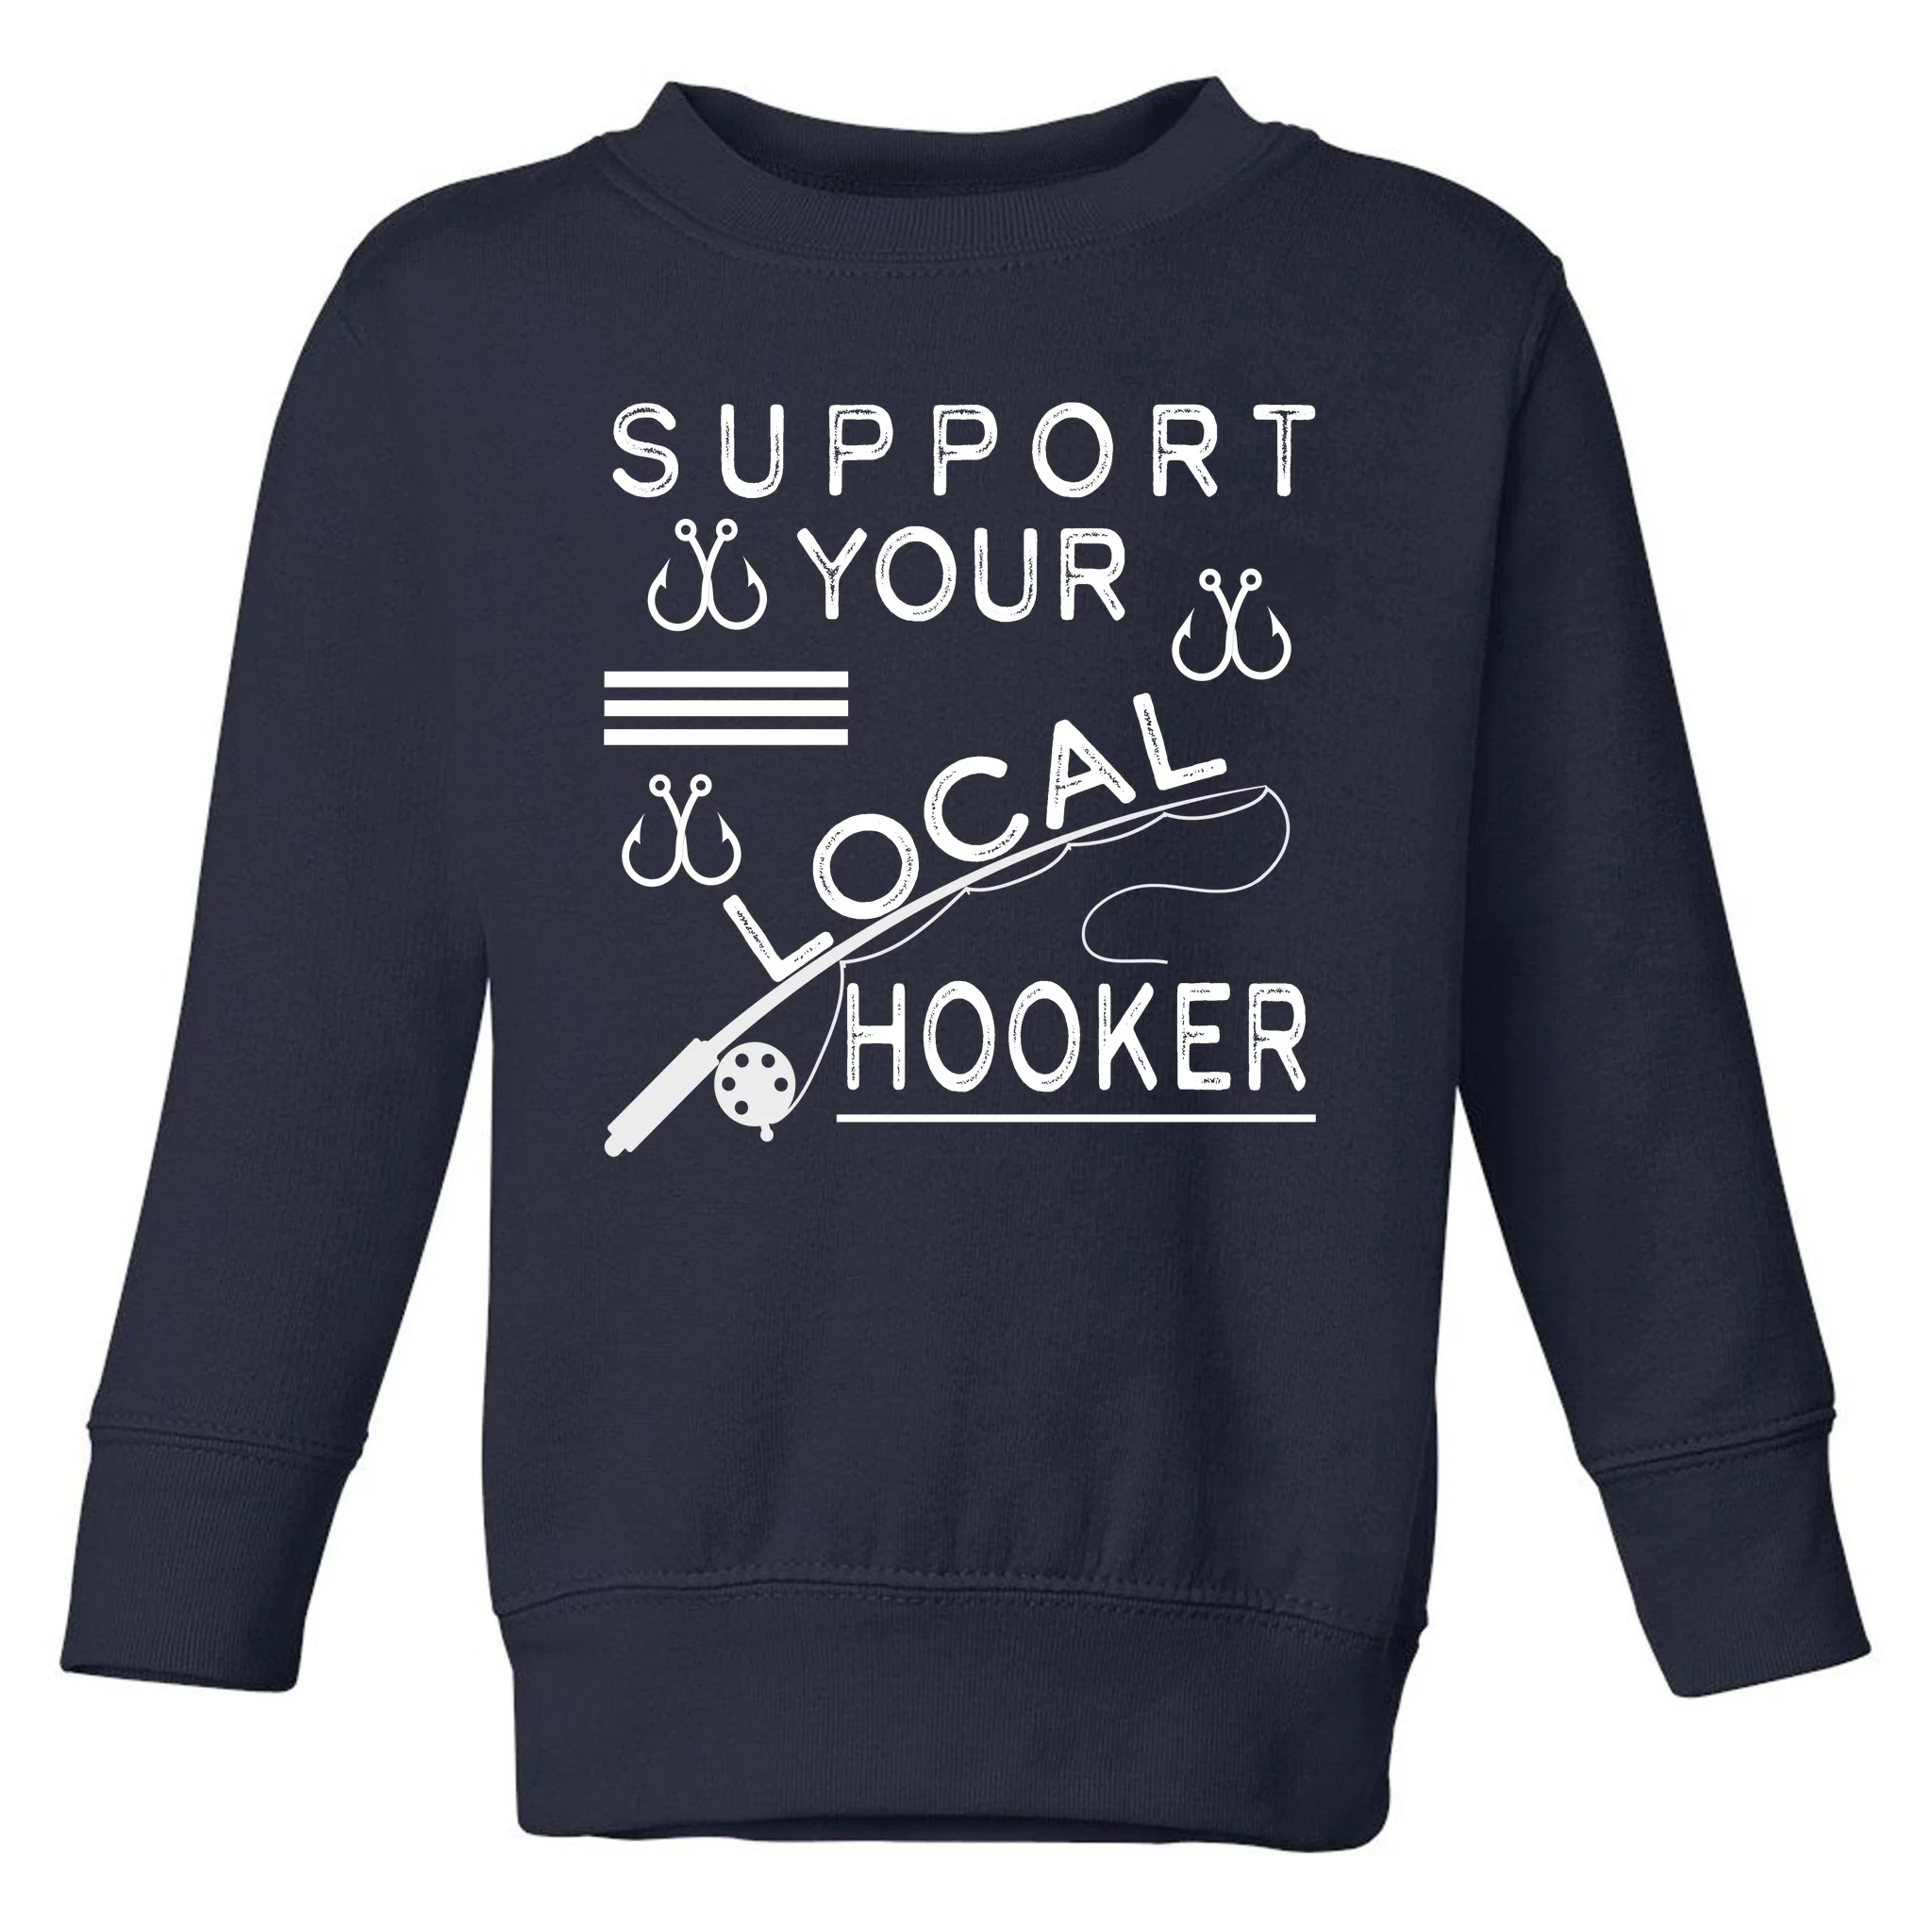 https://images3.teeshirtpalace.com/images/productImages/support-your-local-hooker-funny-fishing--navy-tas-garment.webp?width=700